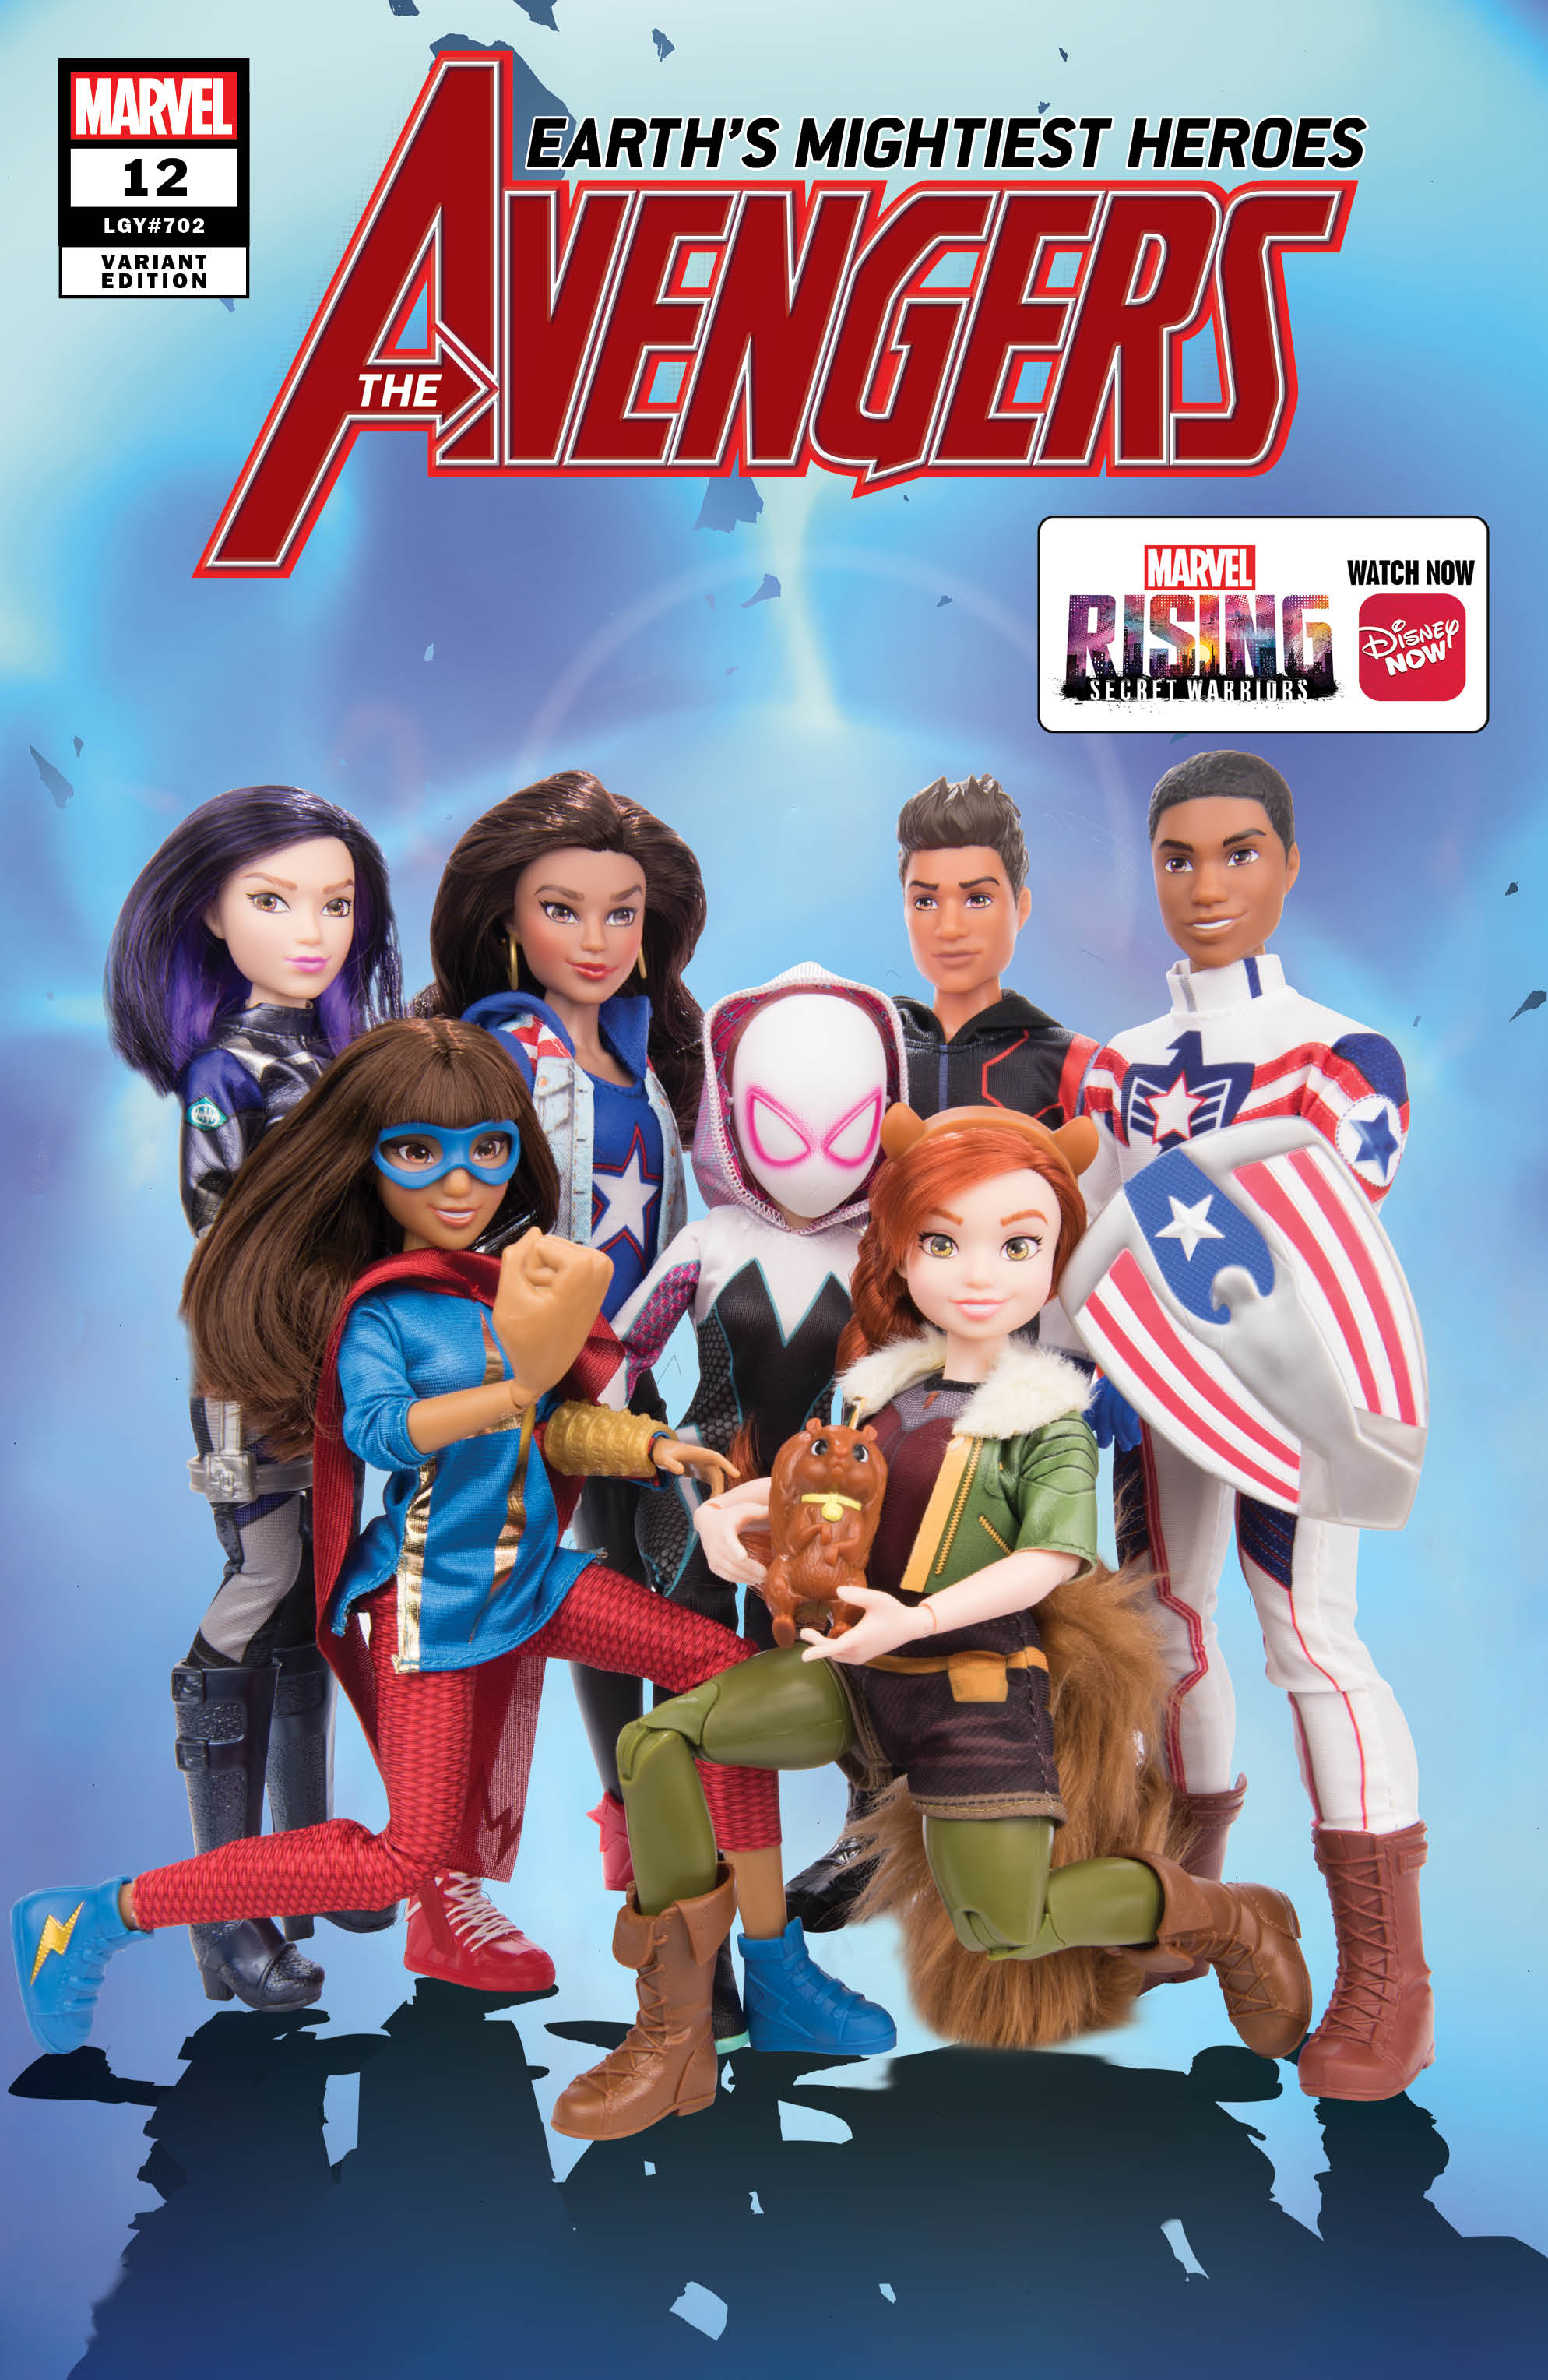 Marvel reveals Marvel Rising Action Doll homage variant covers!